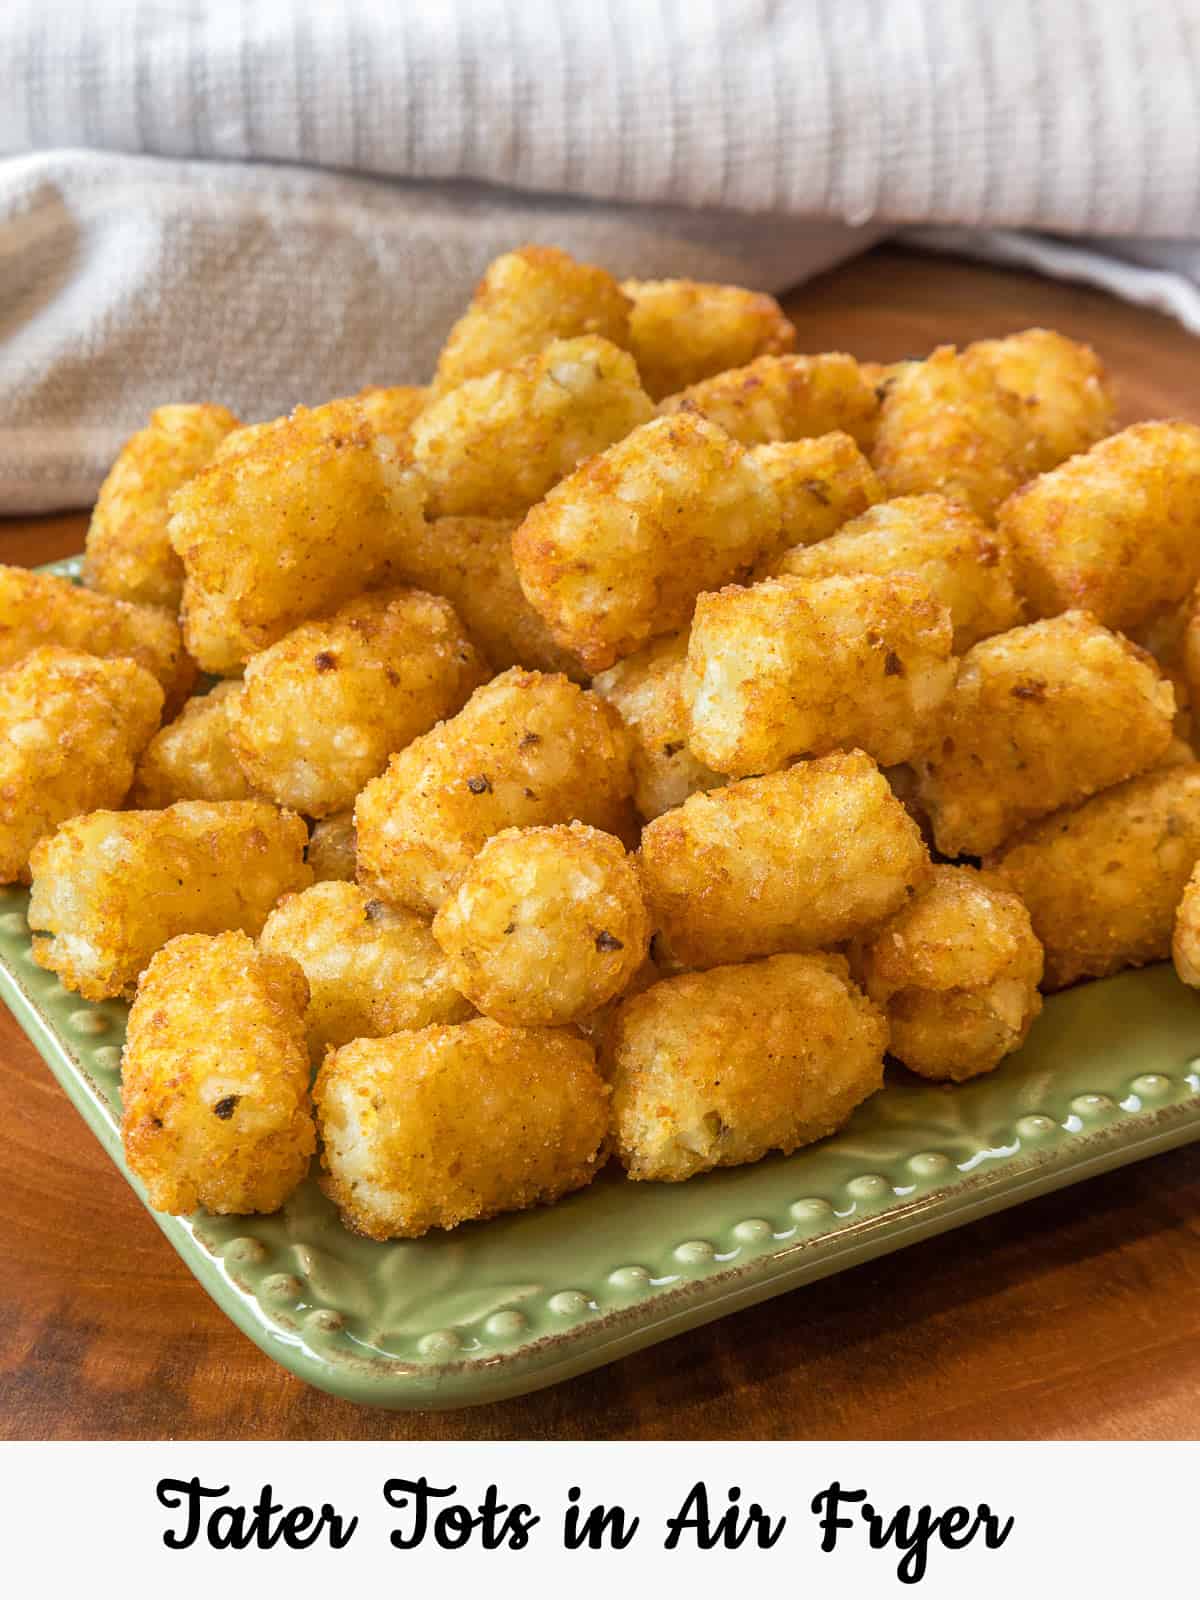 Close-up photo of tater tots on a plate.